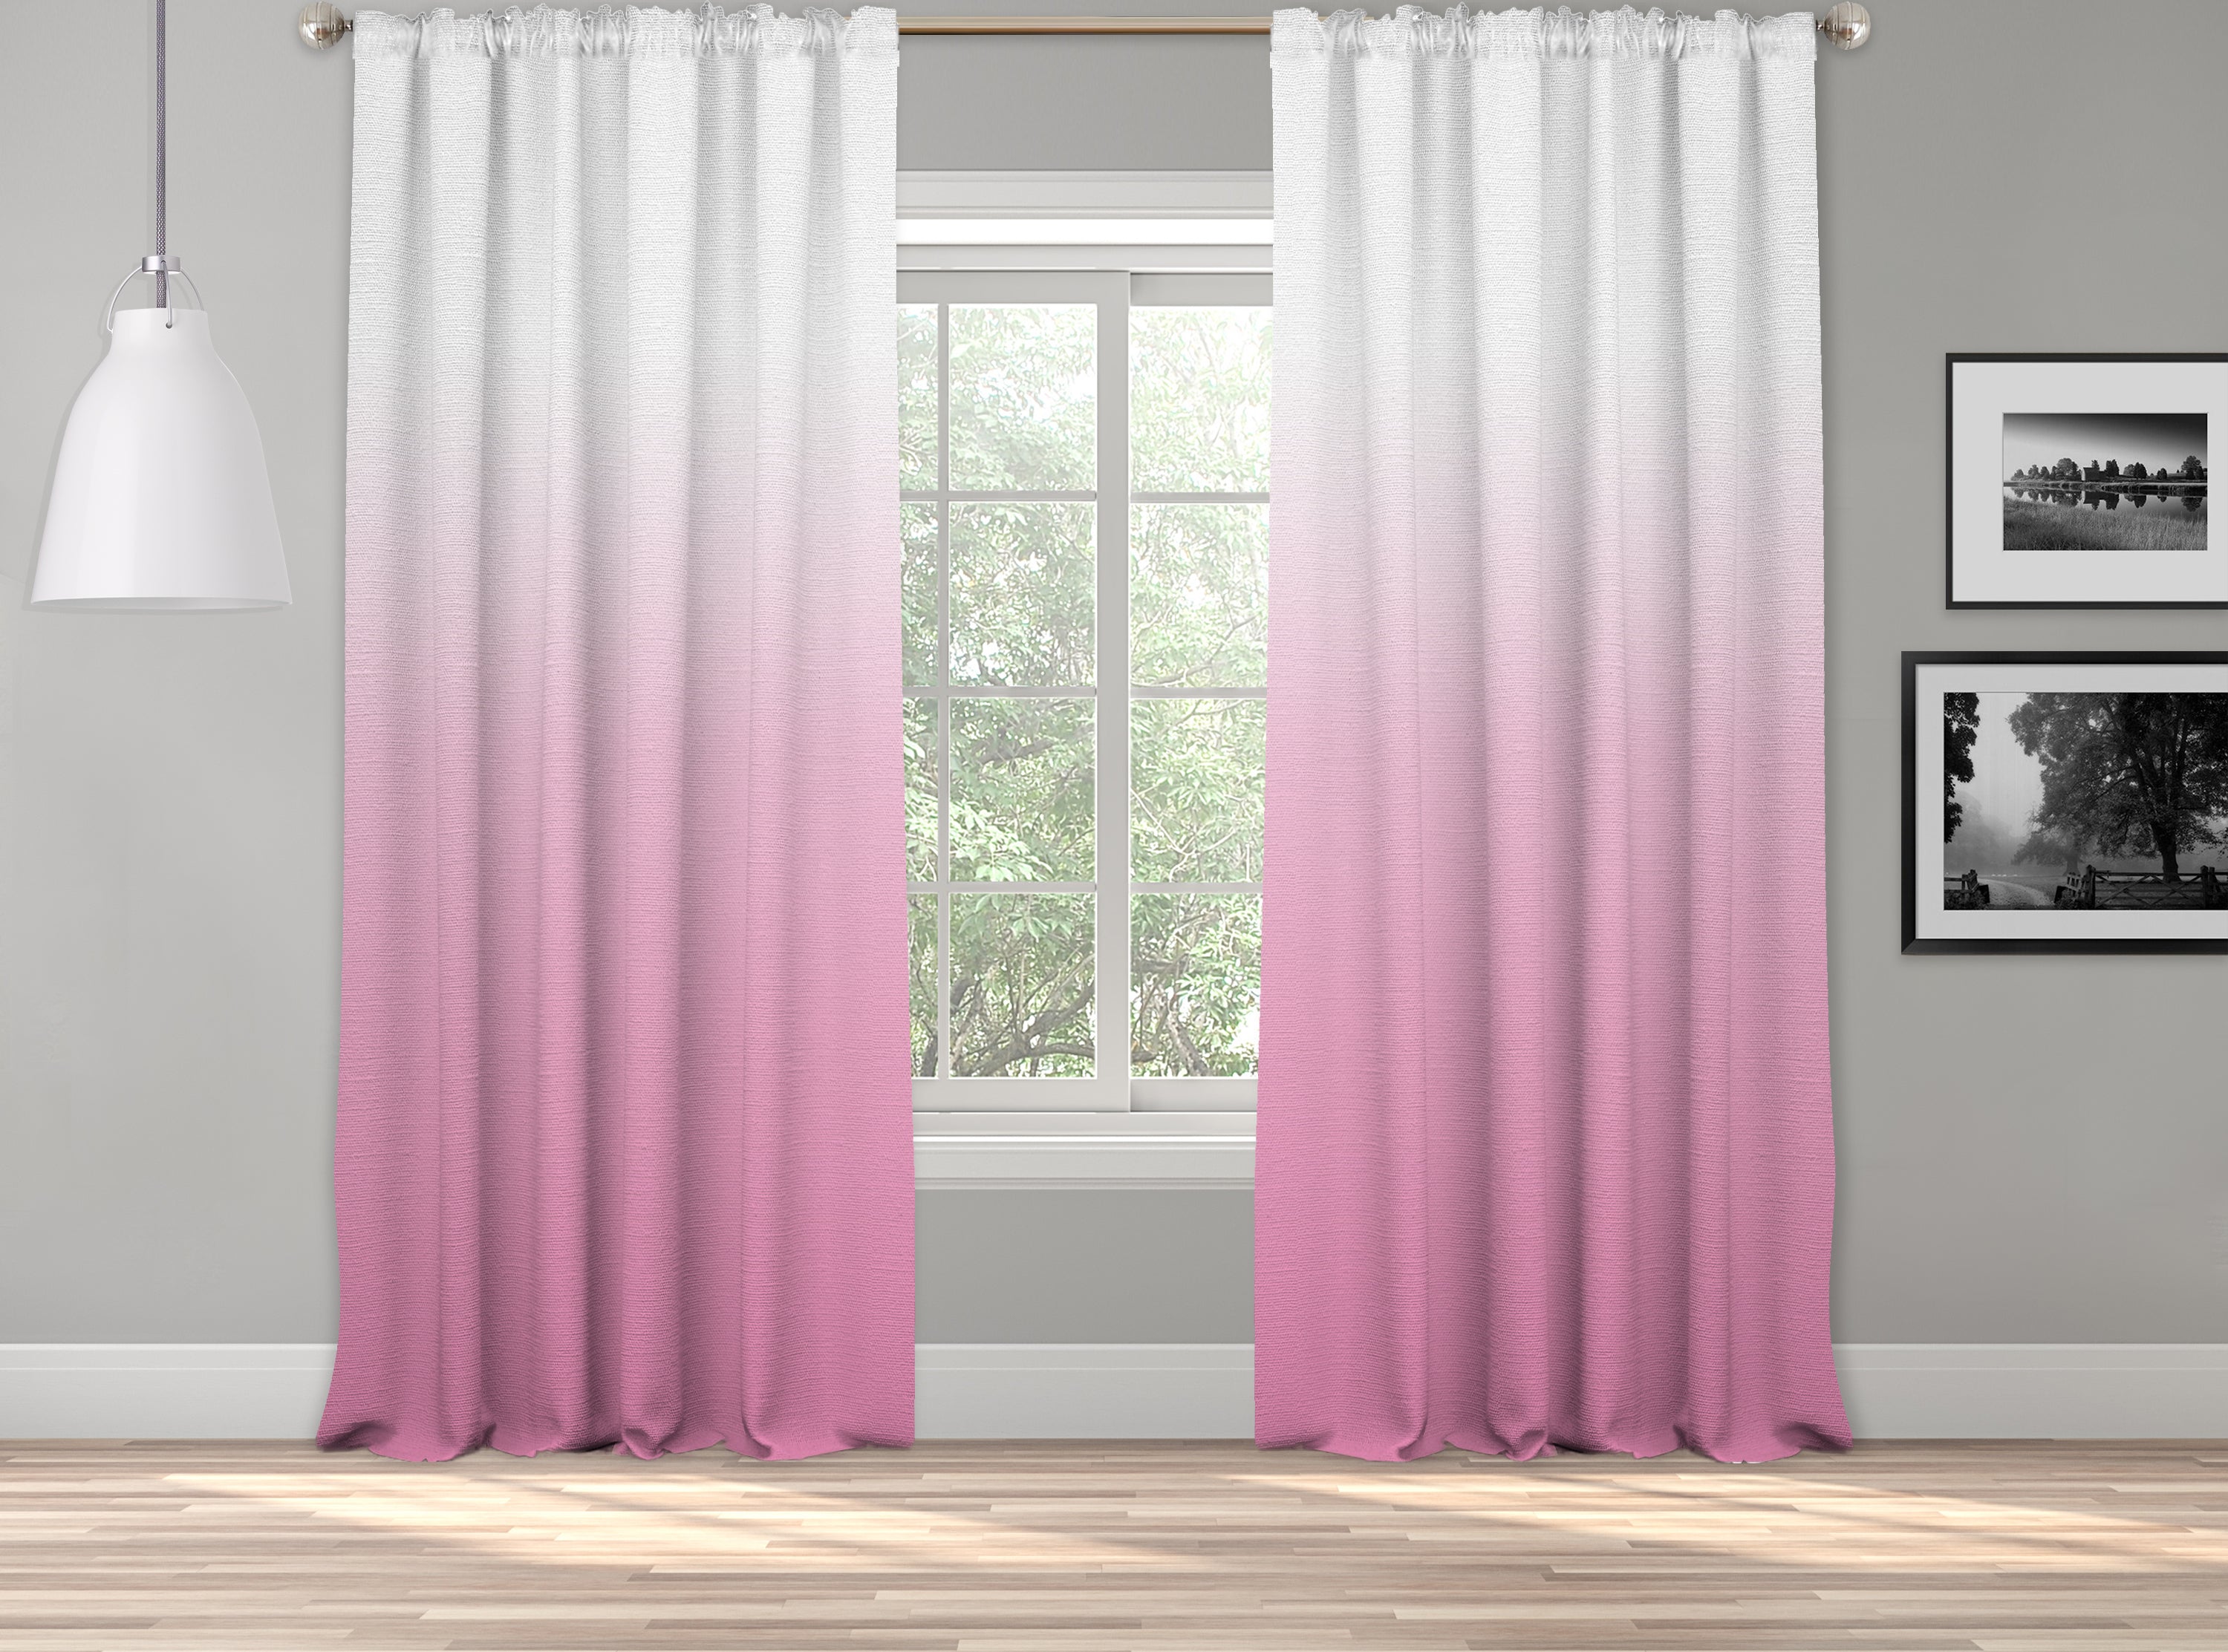 Ombre Grant Window Curtains Dip Dye Set Of 2 Panels Hanging Rod Poc Beshomedesign